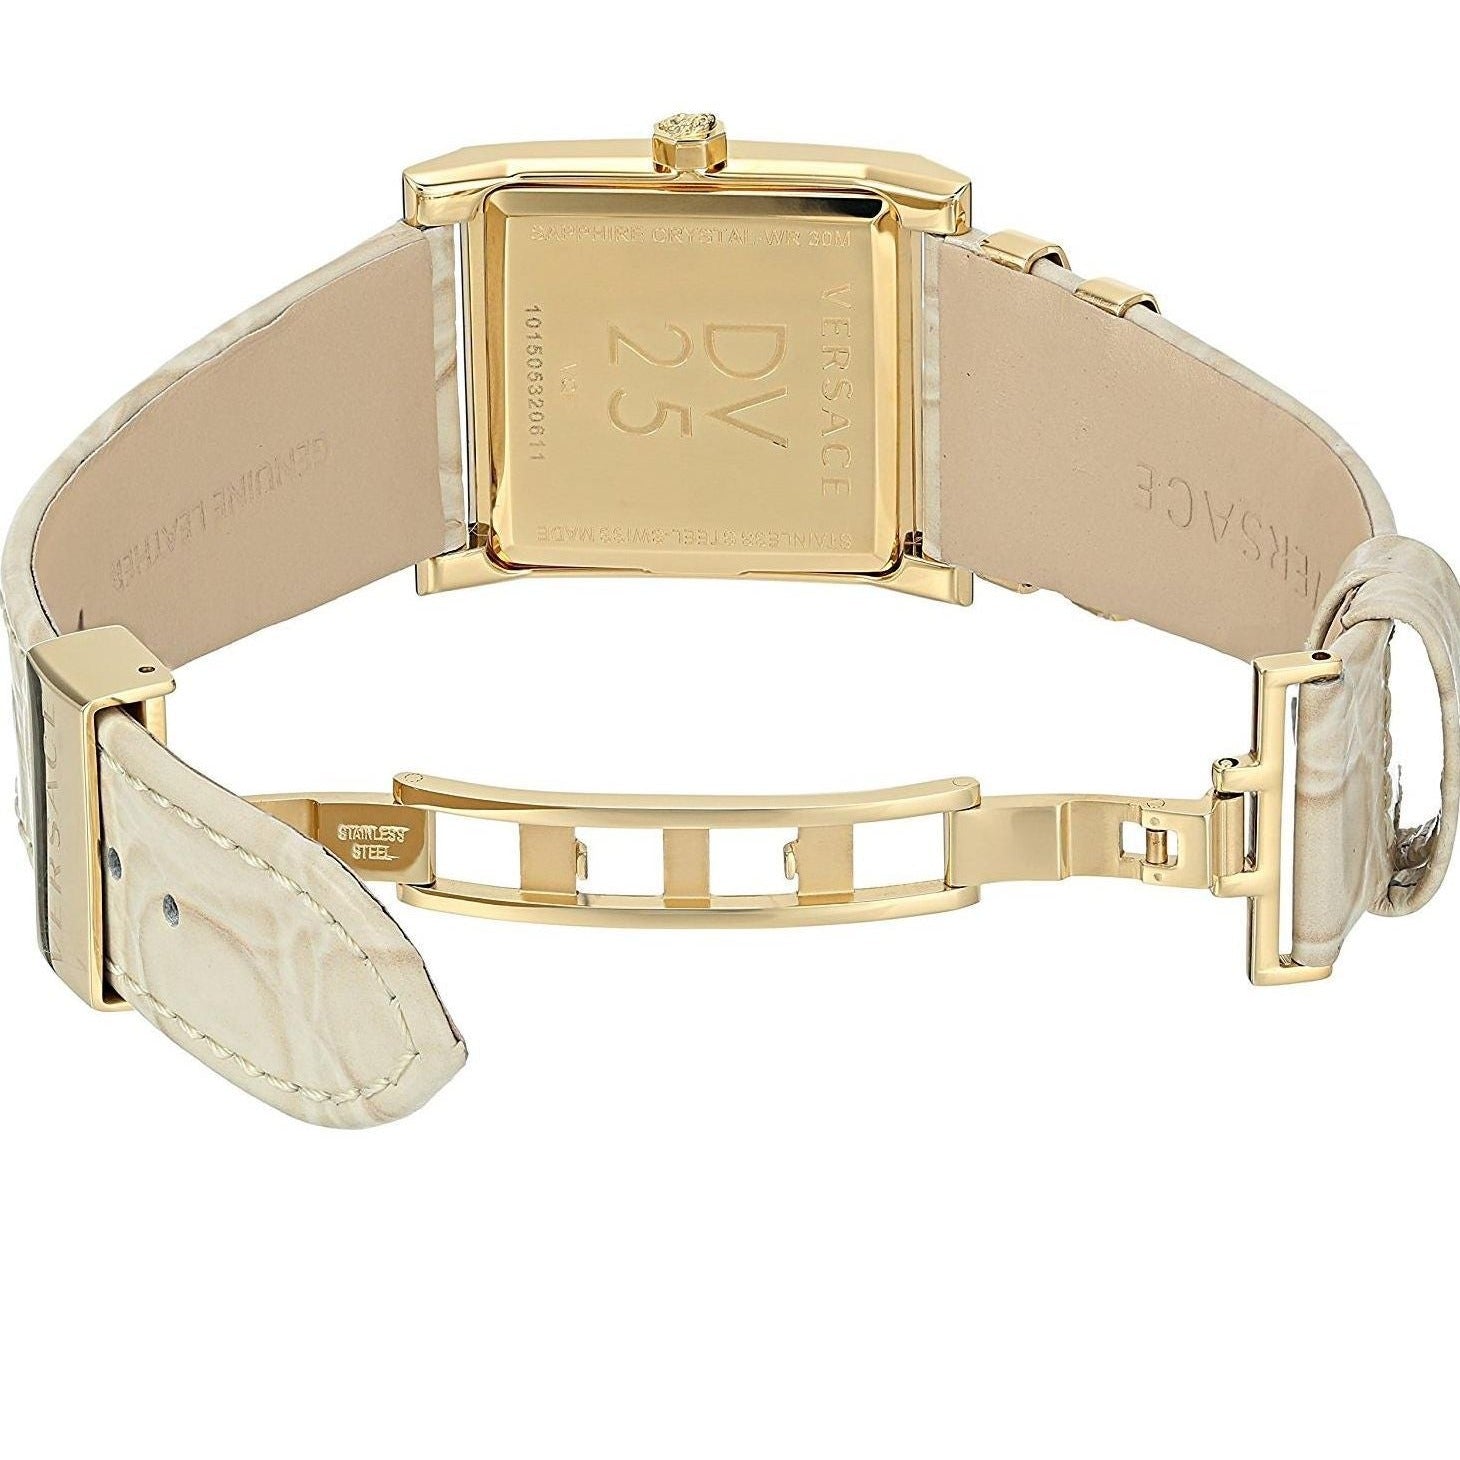 Versace DV-25 Gold Dial Off White Leather Strap Watch for Women - VQF030015